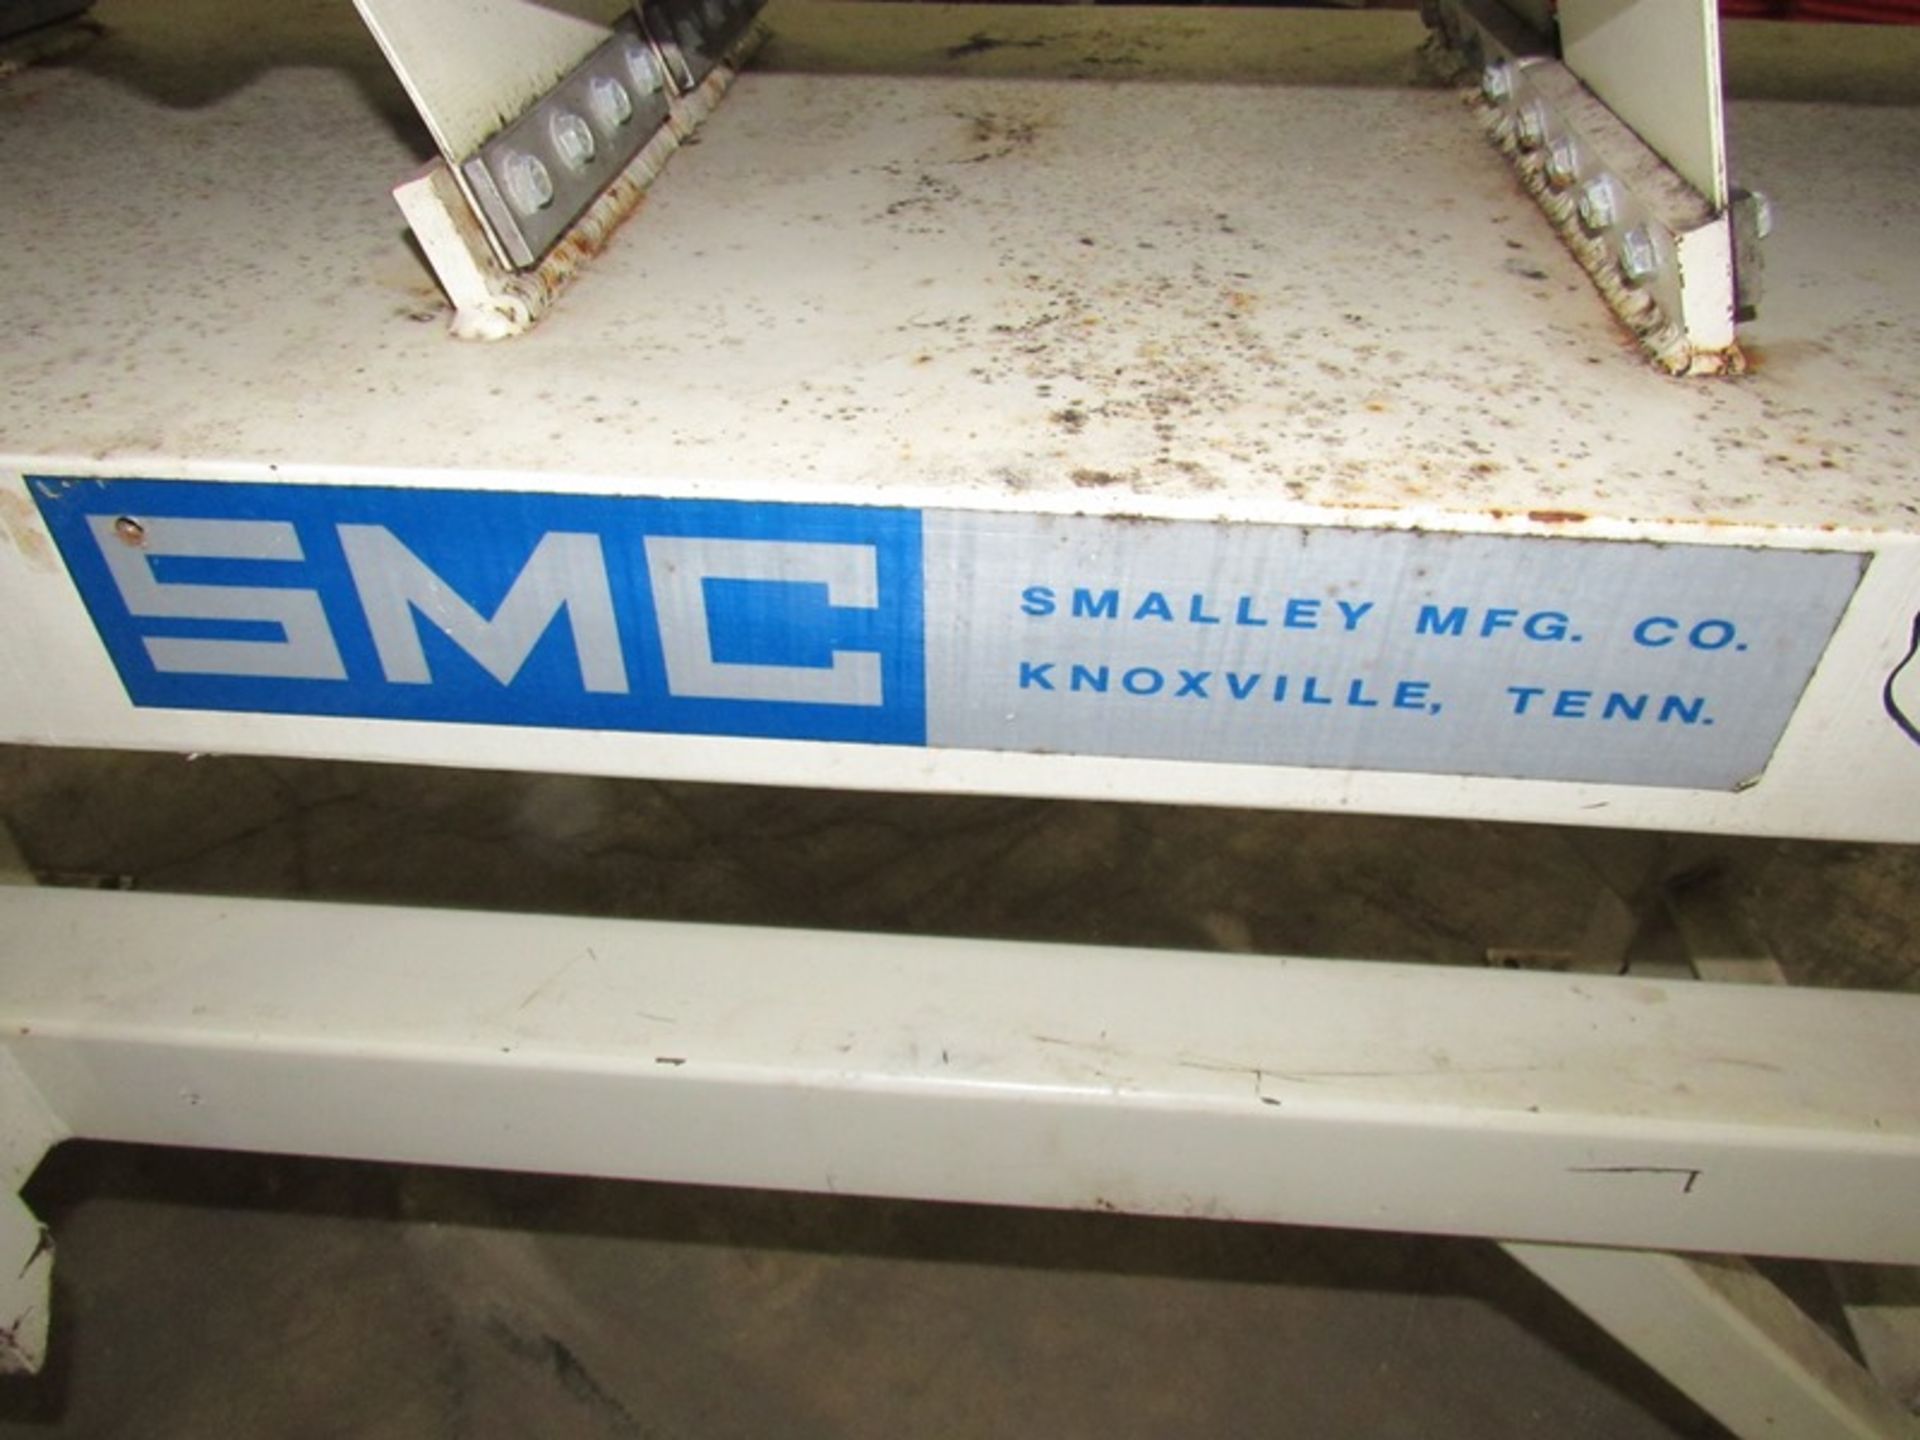 Smalley Mdl. EMC2t Vibratory Conveyor, dimpled stainless steel tray, 18" W X 115" L X 4" D, 9" - Image 6 of 6